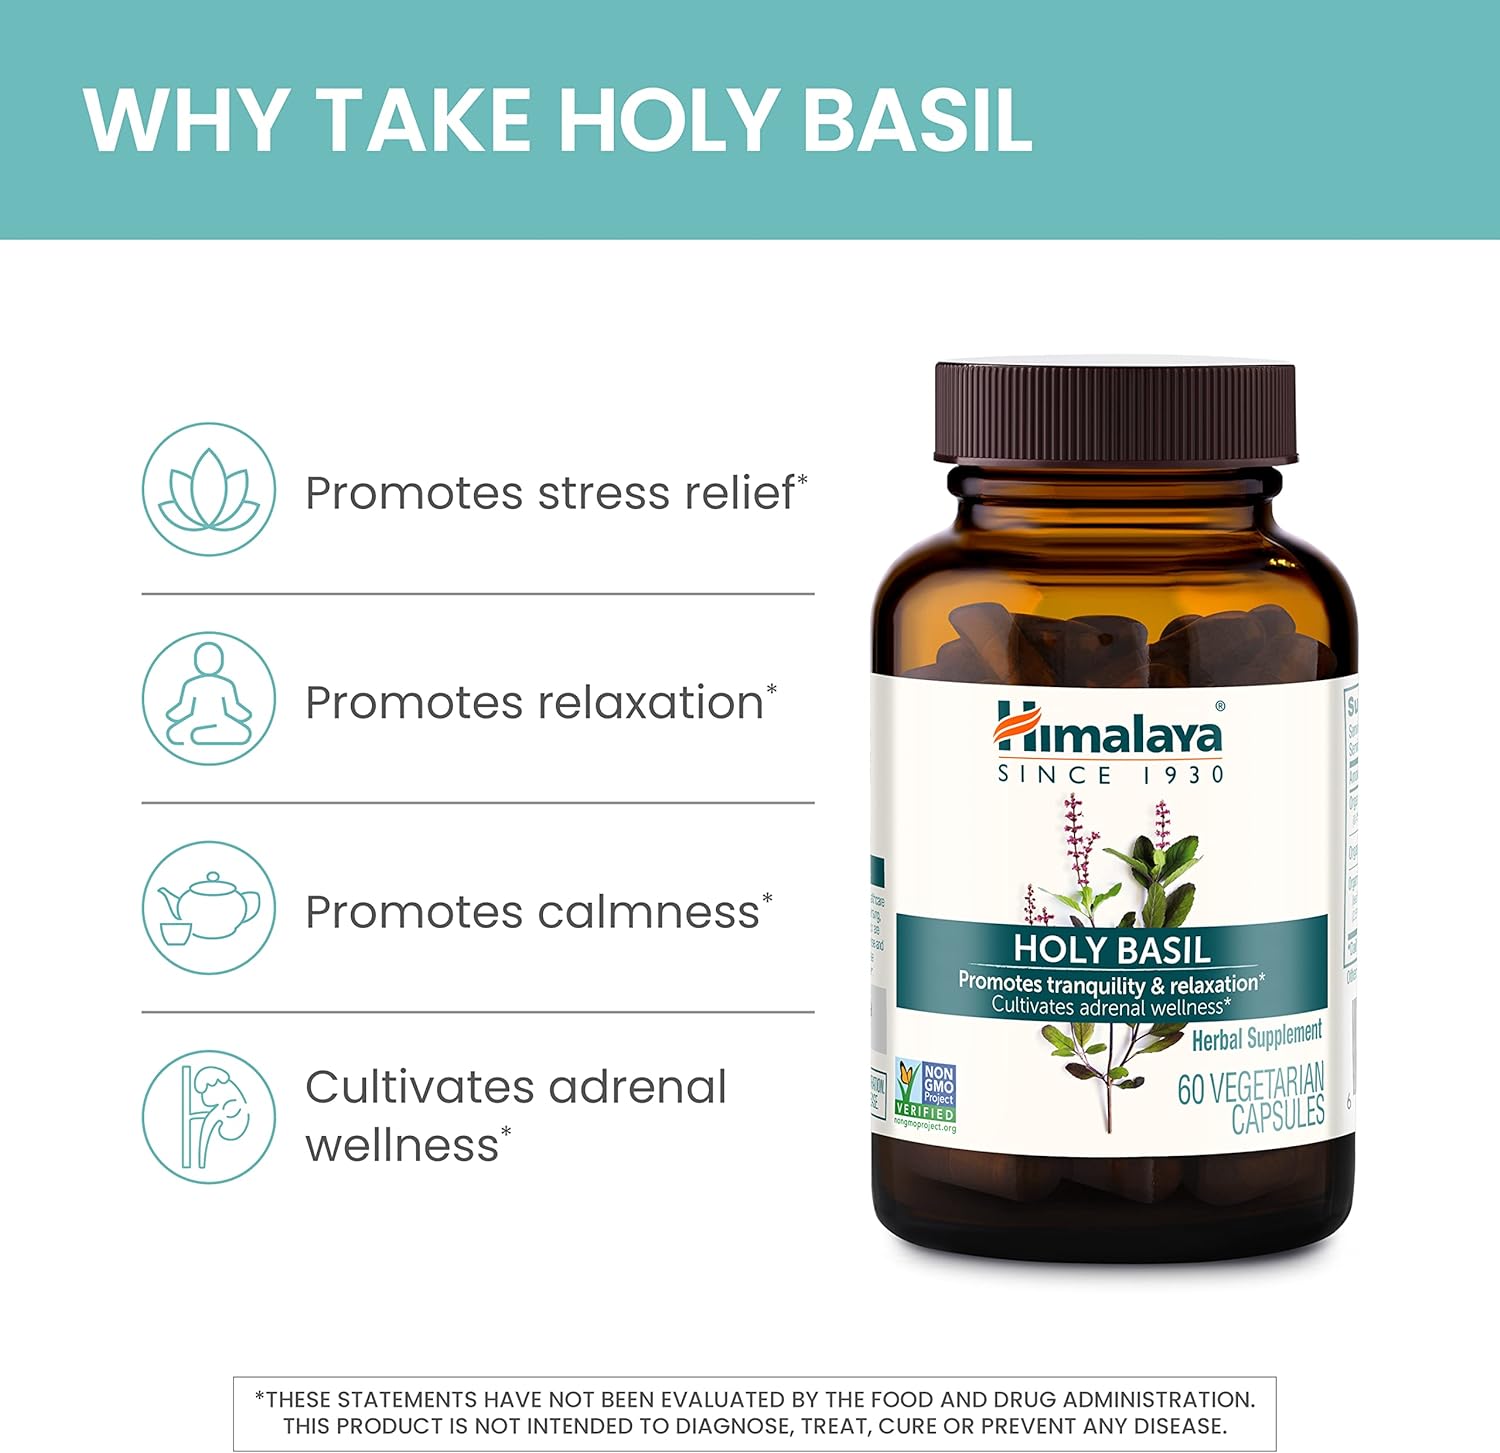 Himalaya Holy Basil Tulsi Herbal Supplement, Stress Relief, Relaxation